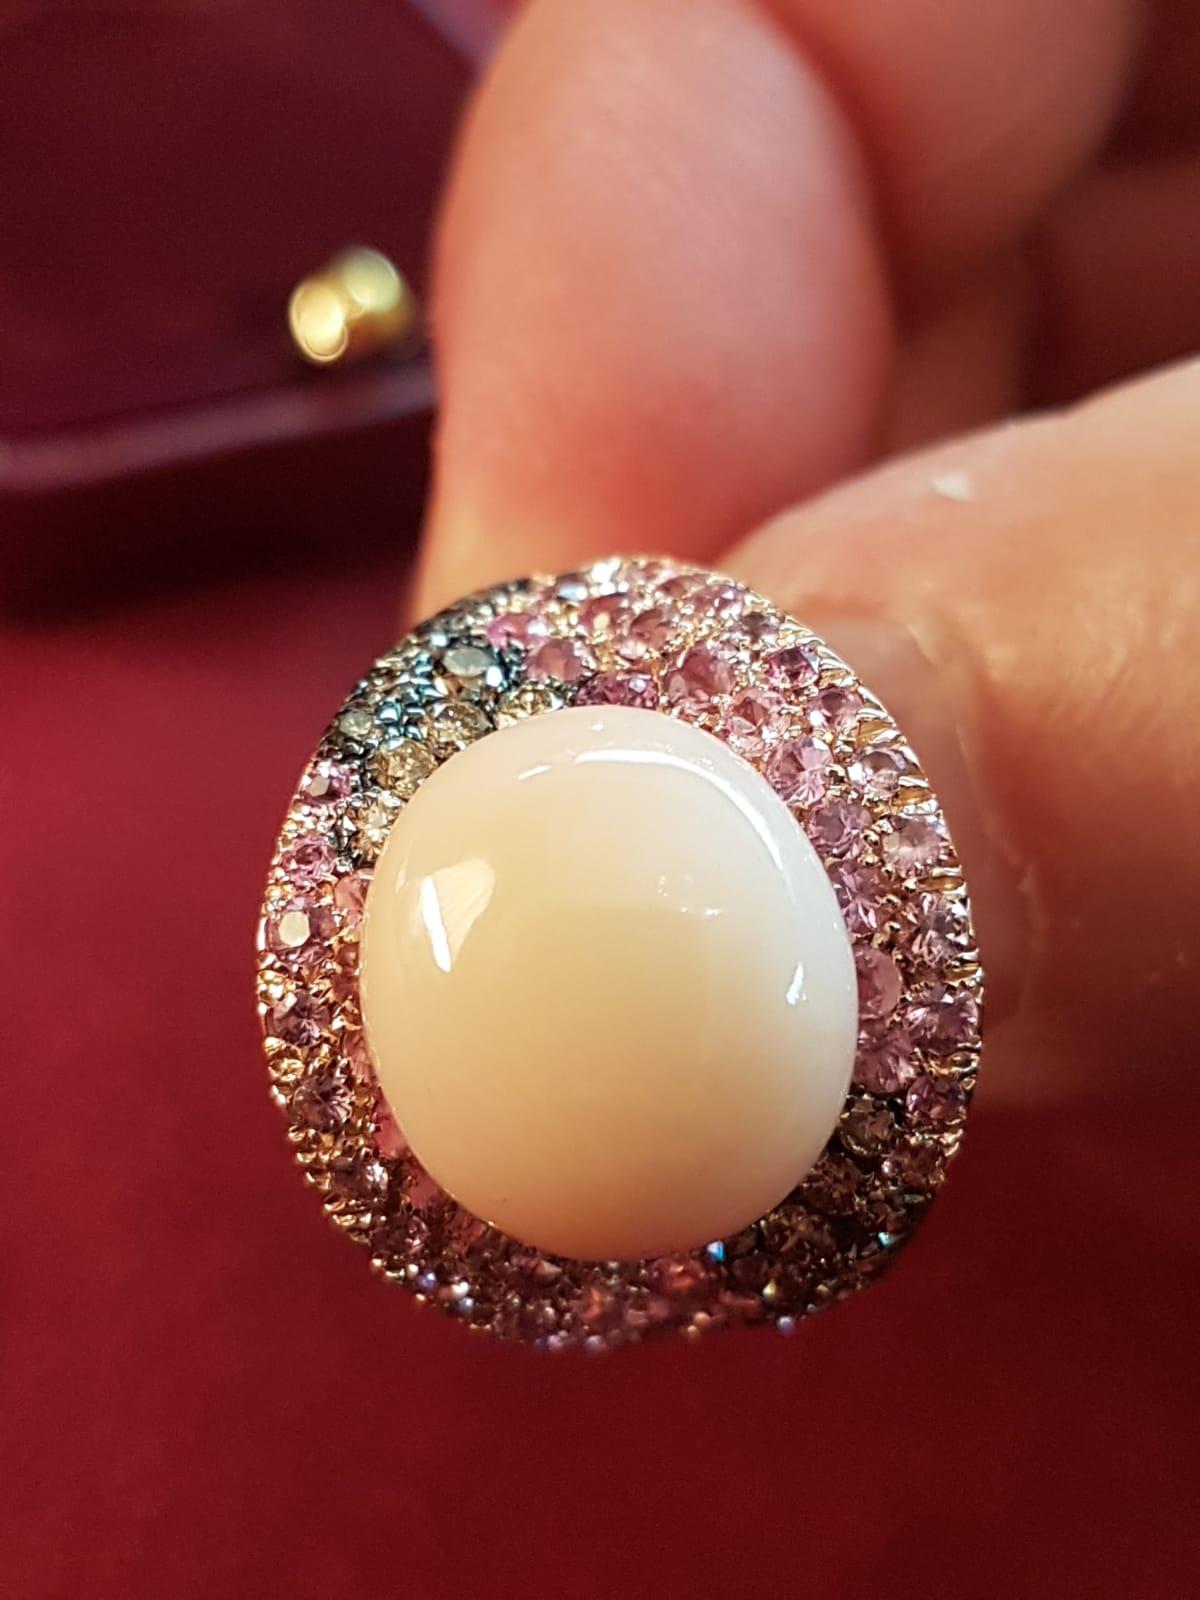 A beautiful, stylish and elegant Rose Gold ring, accented with pink Sapphires (2,07ct) and brown diamonds (0,55ct) that surround a light pink coral stone (1,80gr) bringing into life surprising and amazing color effects.

SILVIO ANCORA designs and